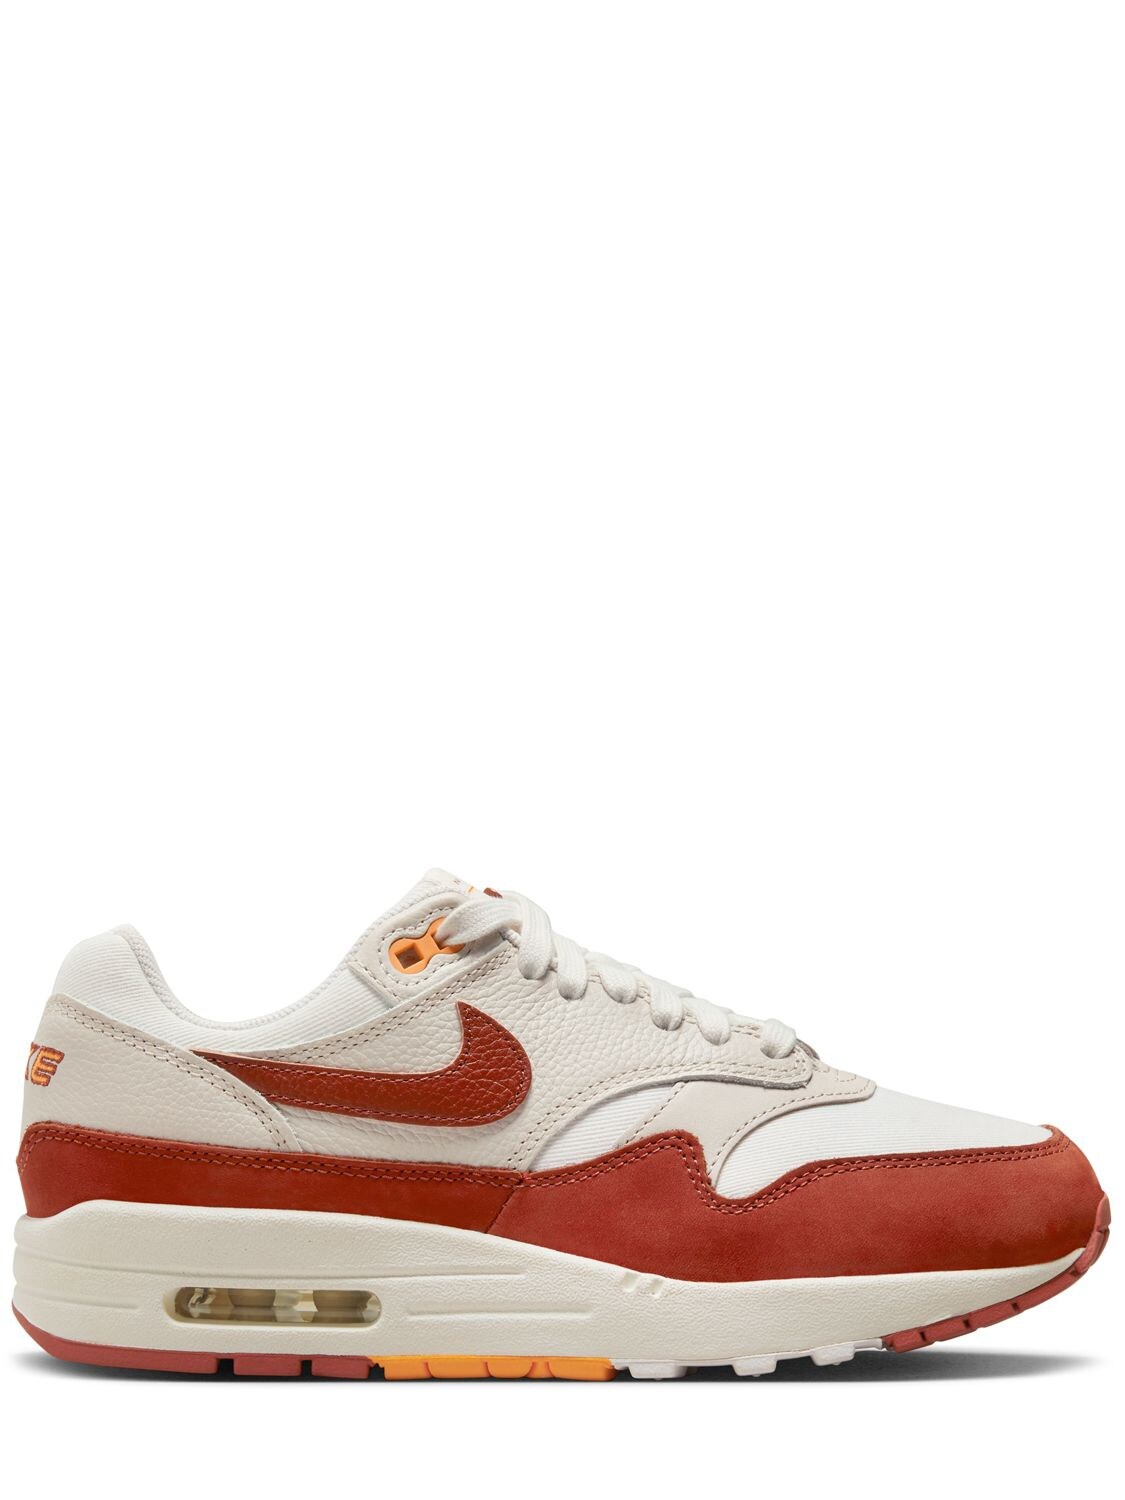 Air Max 1 Lx Sneakers – WOMEN > SHOES > SNEAKERS